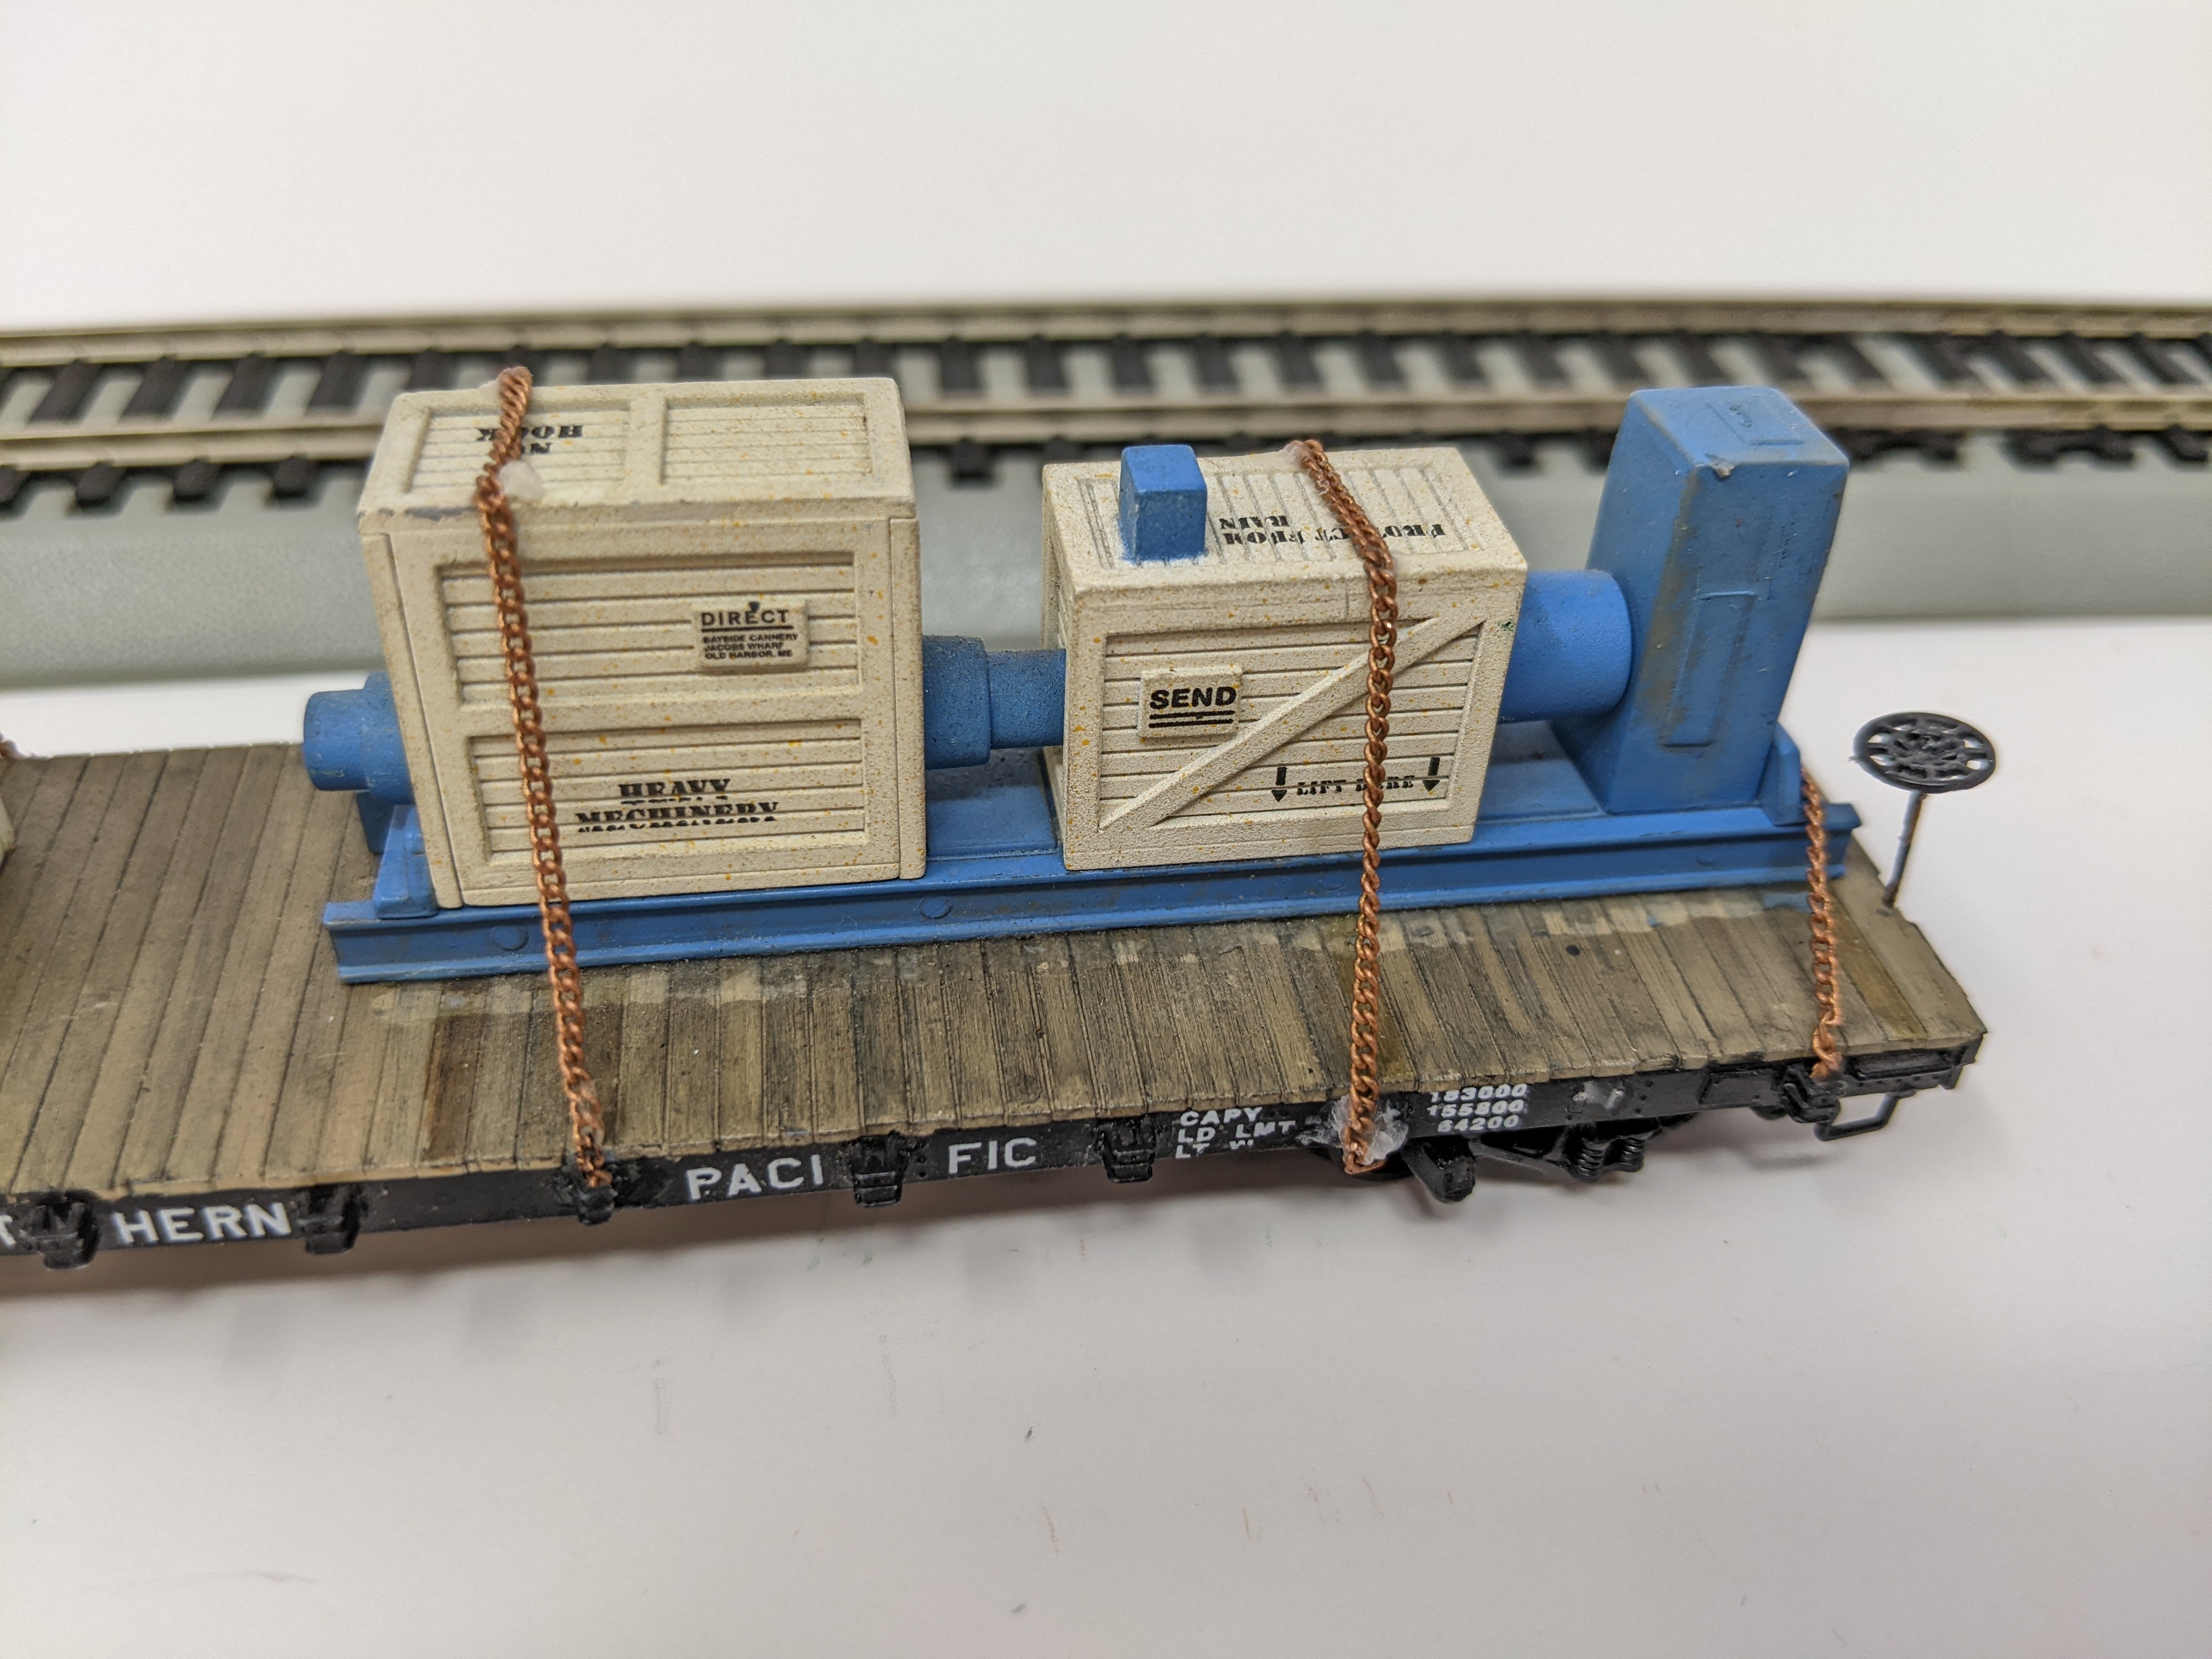 USED HO Scale, 40' Flat Car, Northern Pacific NP #61805, Custom Heavy Industrial Machinery Load